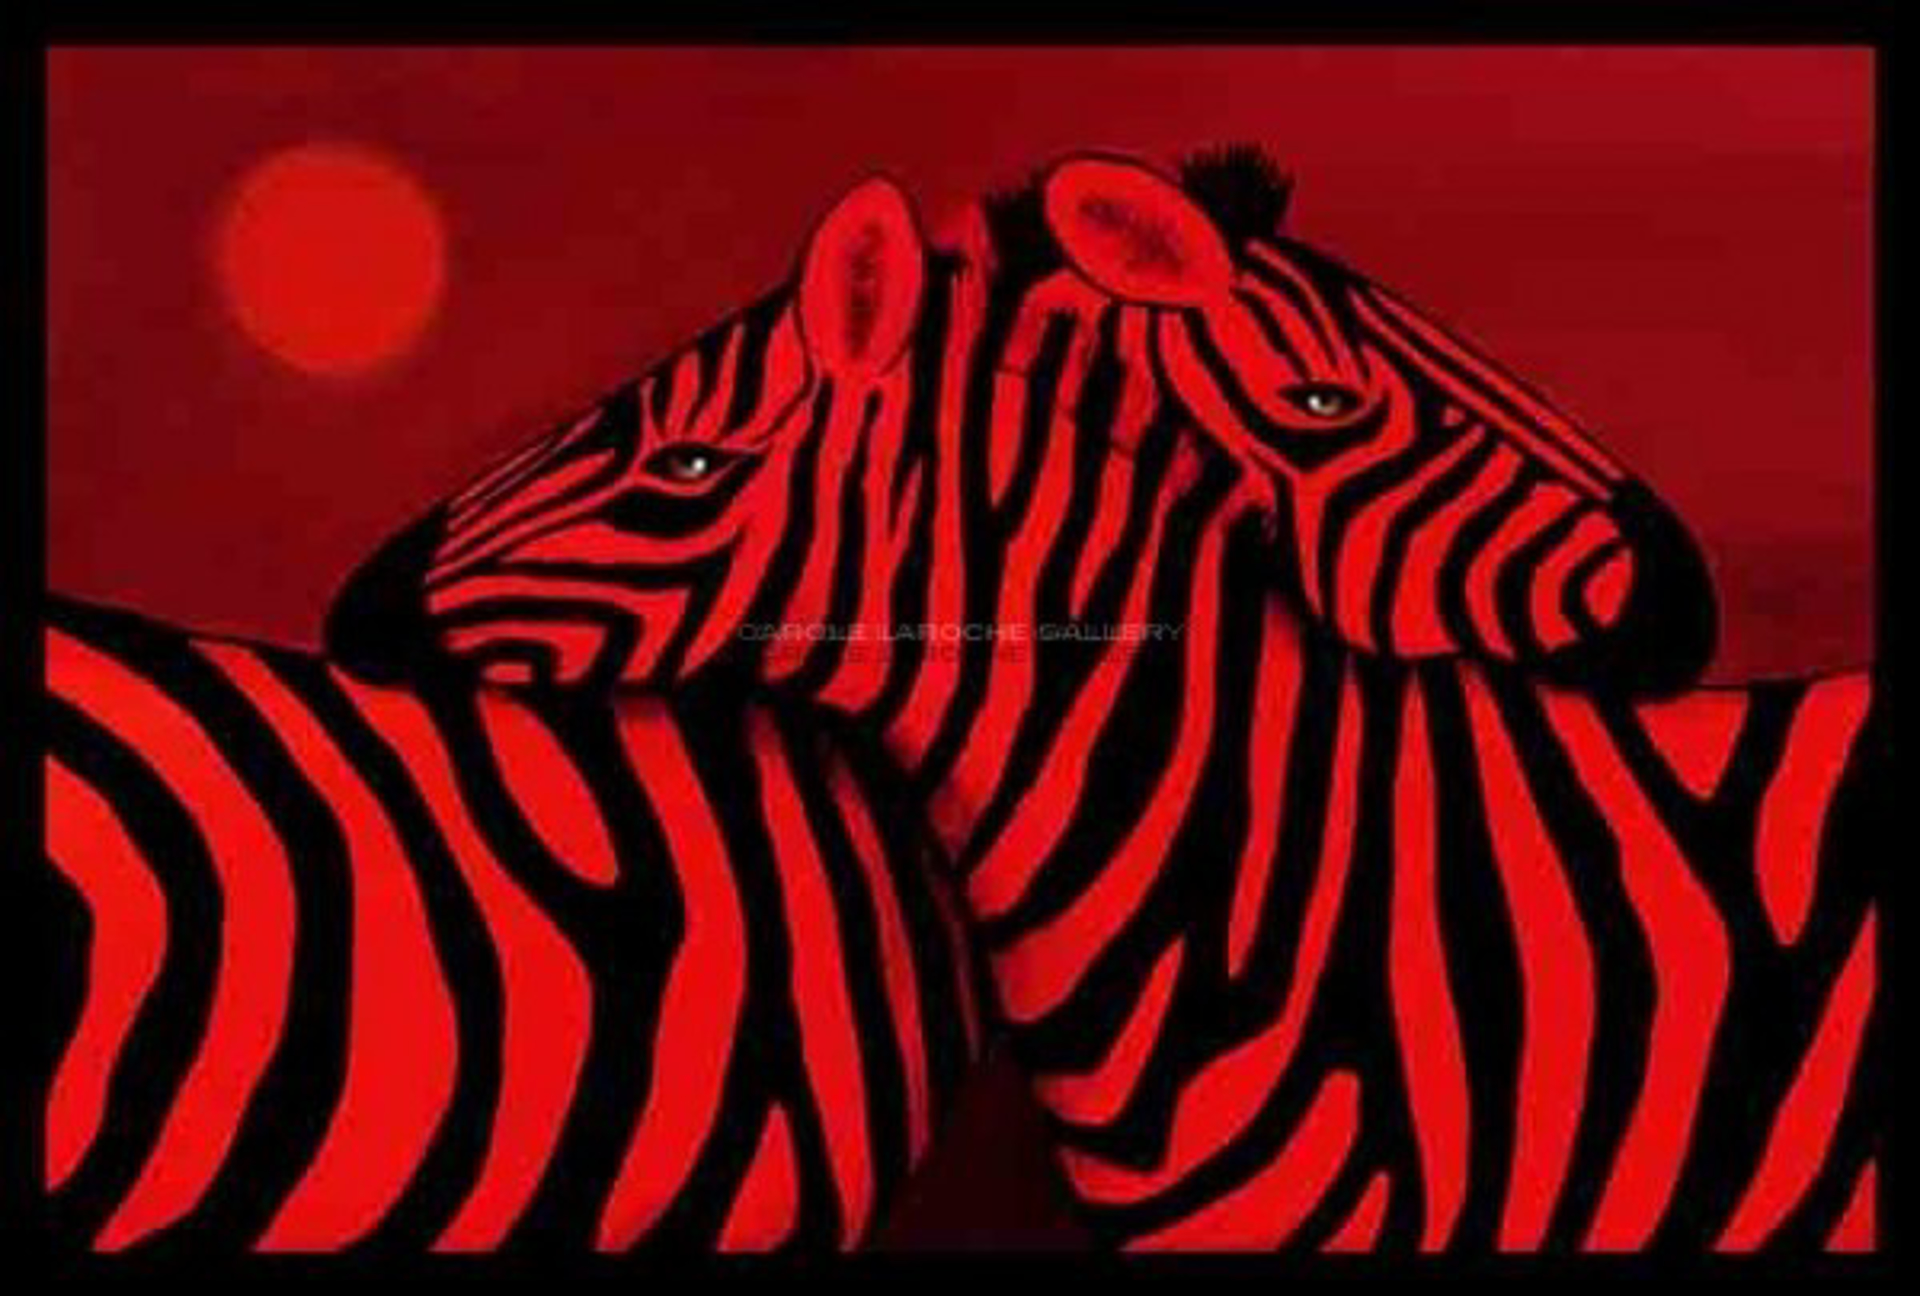 TWO RED ZEBRAS - limited edition giclee on canvas: (large) 40